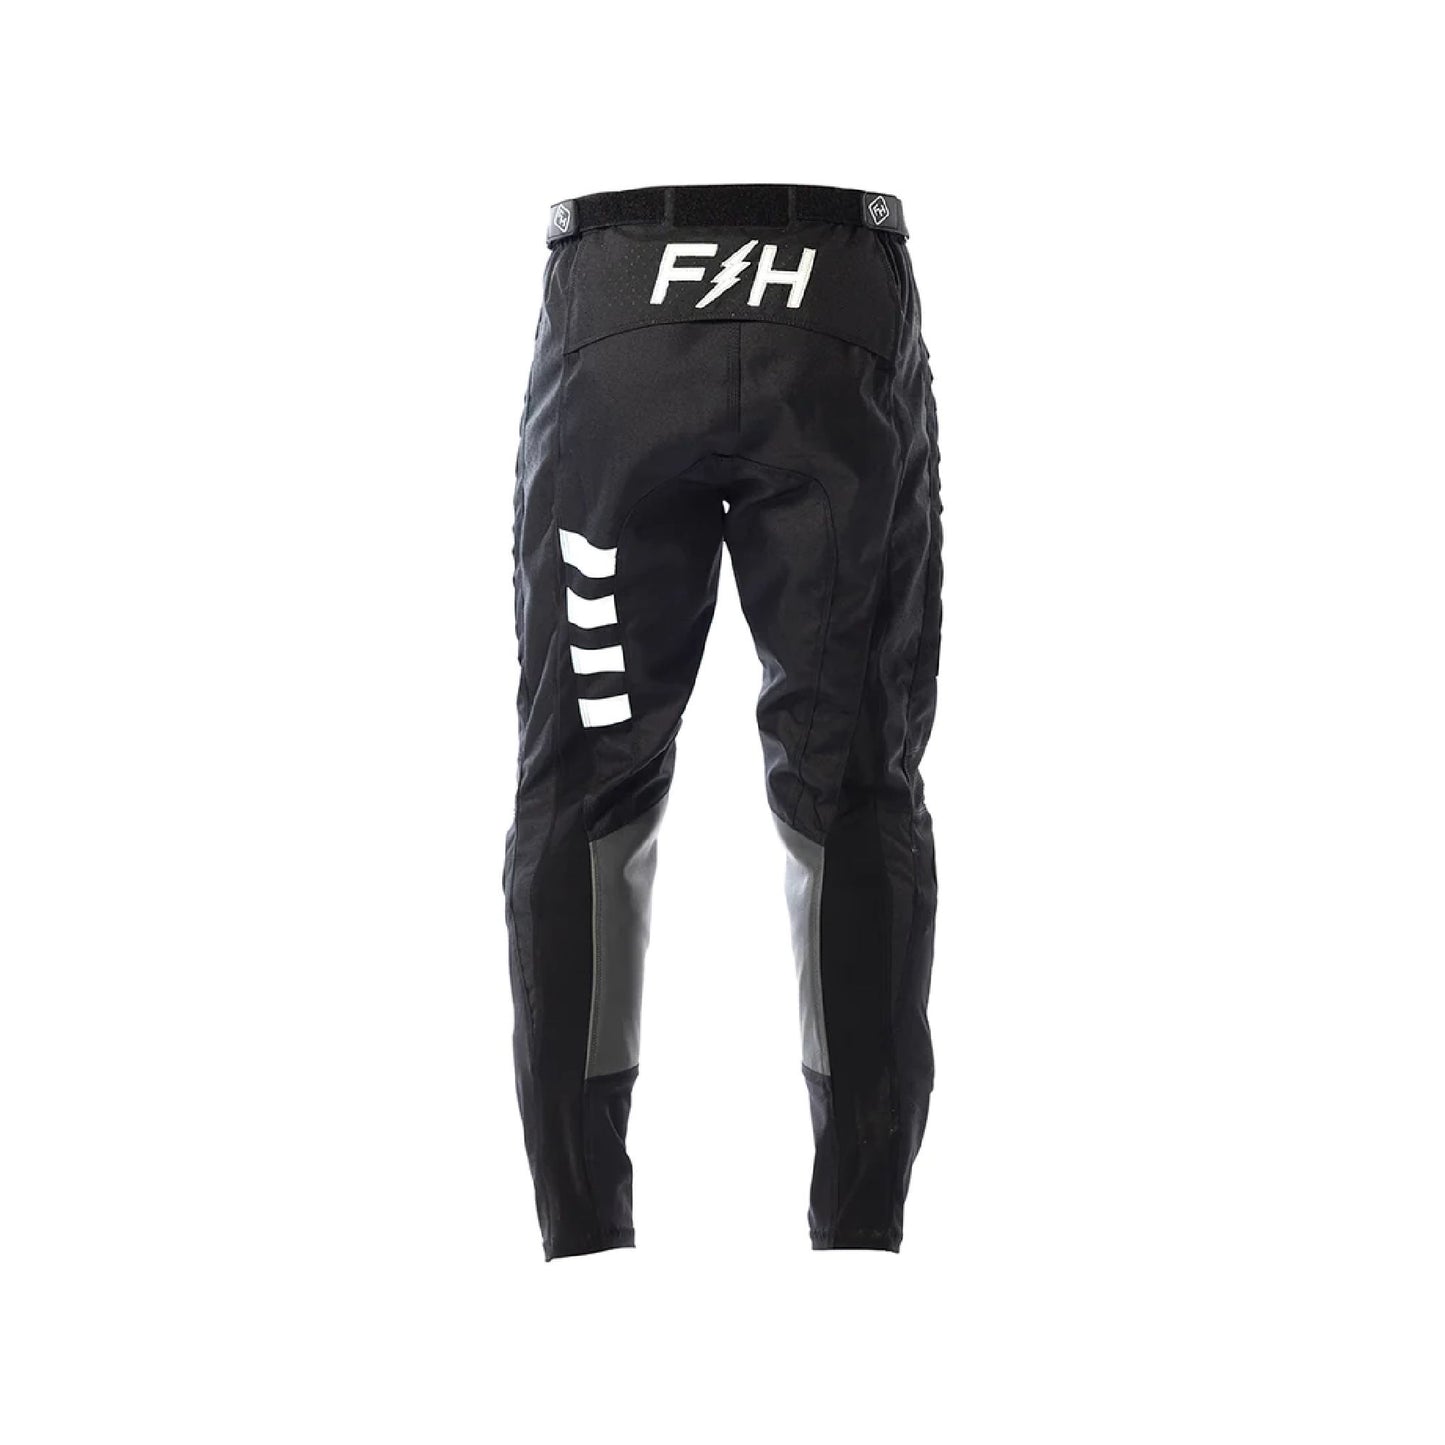 Fasthouse Youth Grindhouse Pants Black Bike Pants